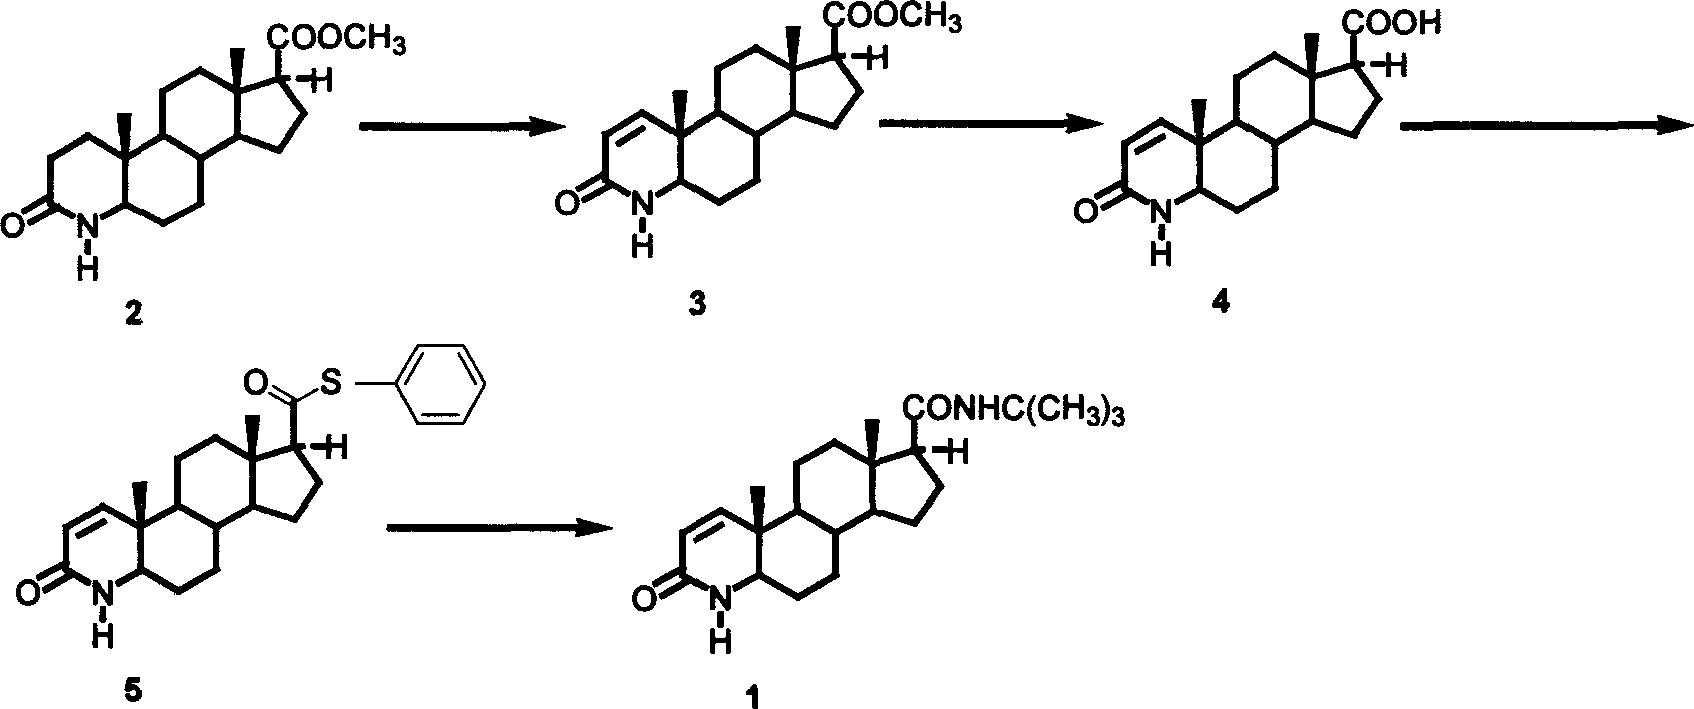 Synthesis method of N-tertiary butyl-3-carbonyl-4-aza-5 alpha-androl-1-end-17 beta-formamide